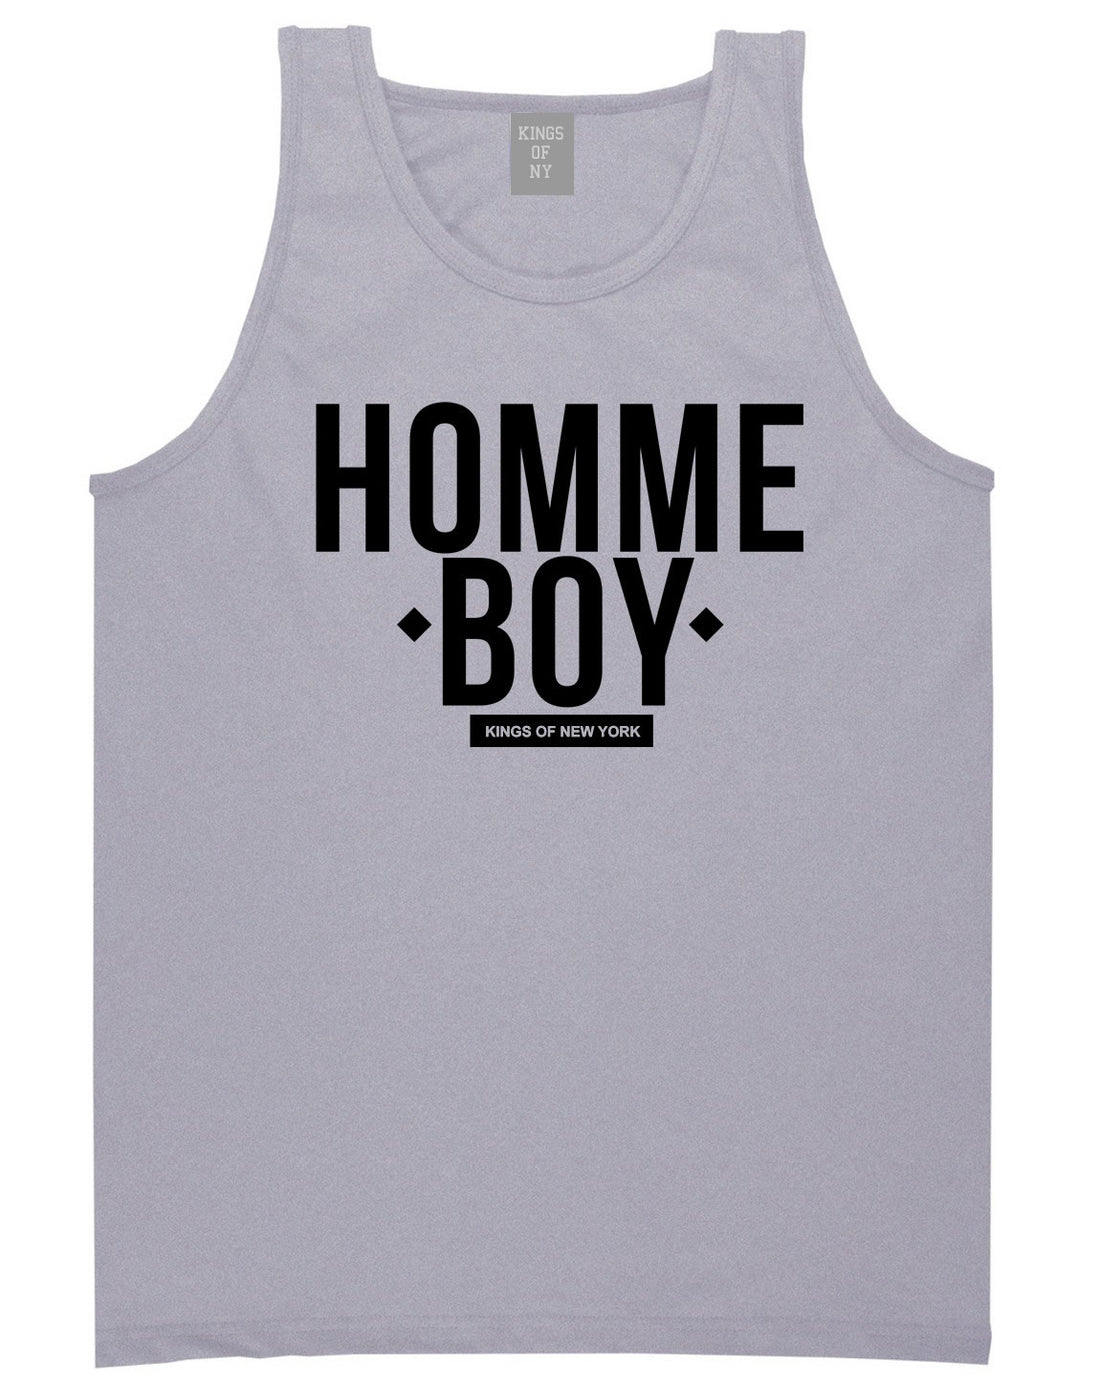 Kings Of NY Homme Boy Tank Top in Grey